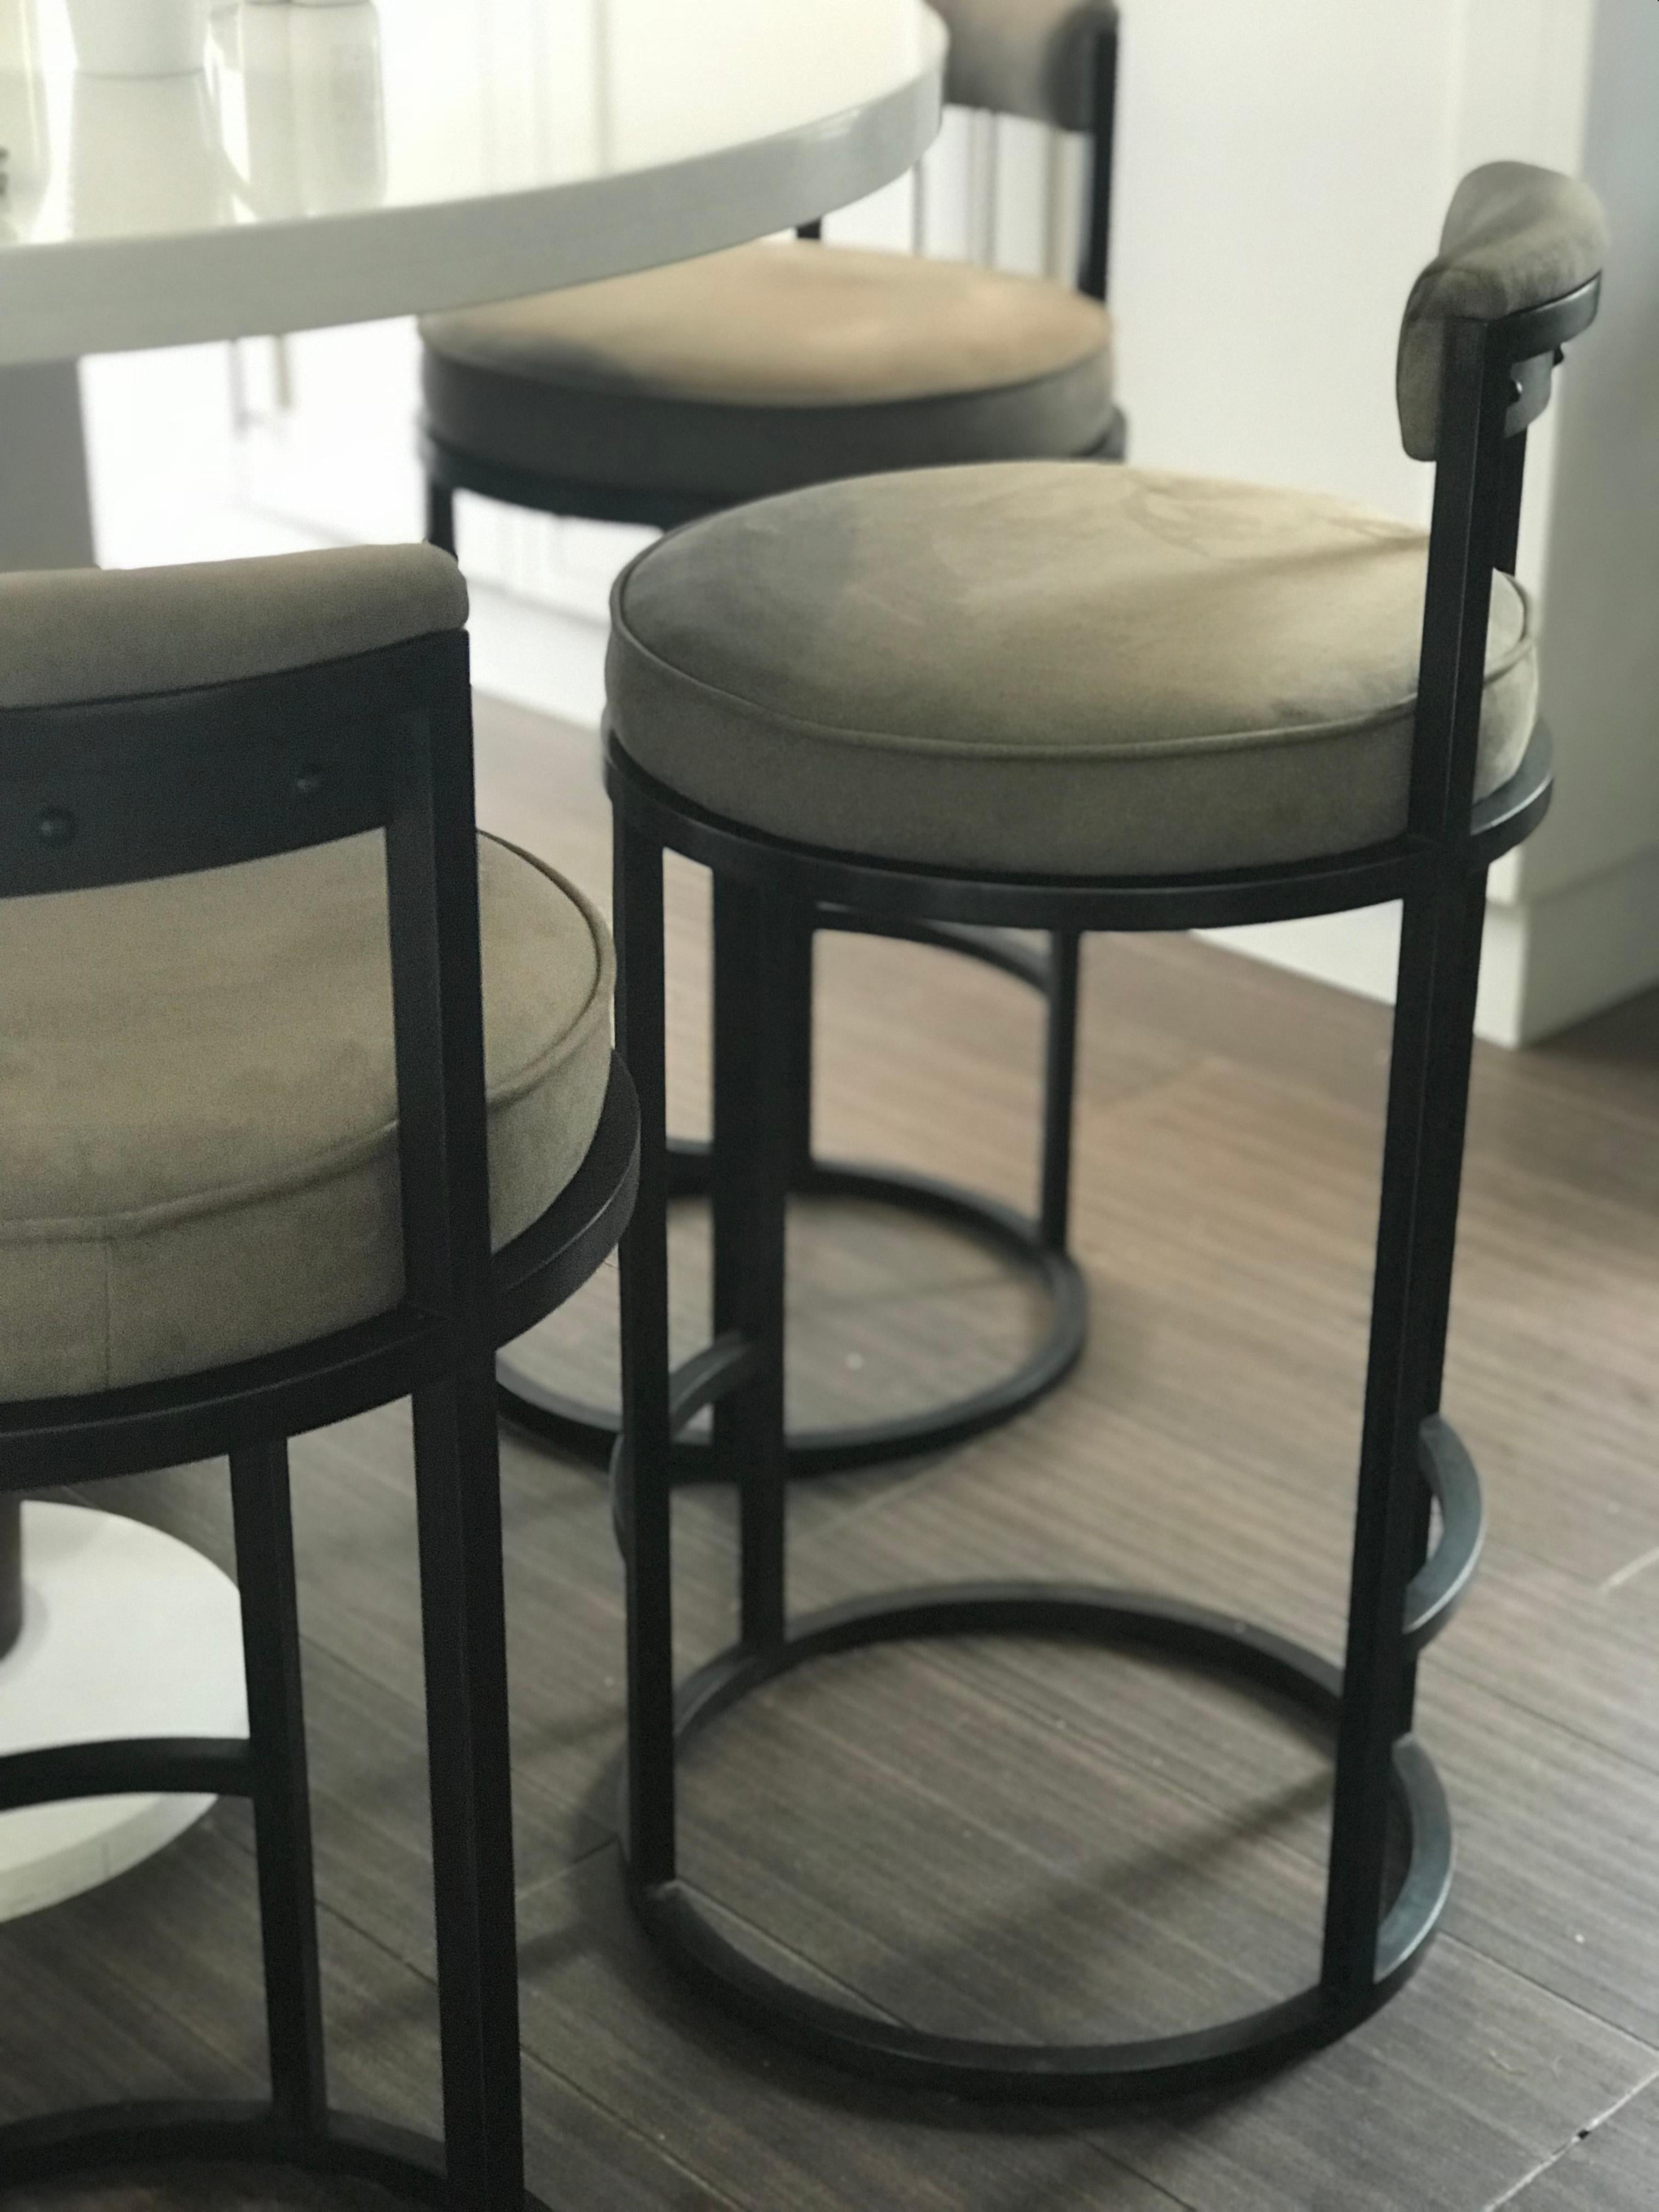 Ultrasuede Diana Bar Stool Circular with Back Rest in Steel Powder-Coated and Novasuede For Sale